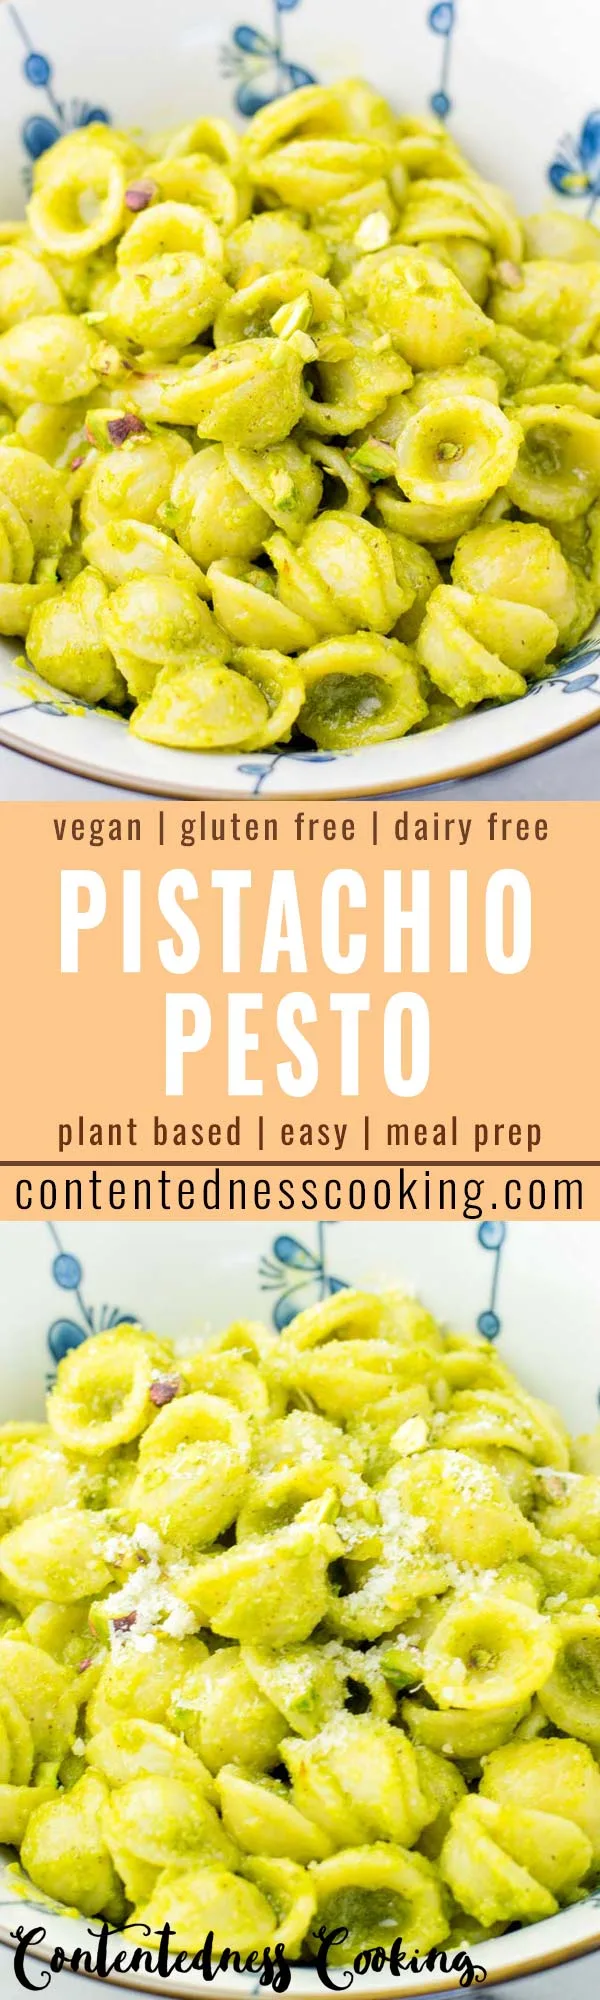 This Pistachio Pesto is super easy to make and so delicious over pasta! No one would ever guess it is vegan and dairy free. A staple for dinner, lunch, meal prep, work lunch, easy family dinners that the whole family and even pickiest kids will love. #vegan #dairyfree #glutenfree #vegetarian #dinner #lunch #mealprep #worklunchideas #kidsmeals #familyfavoritedinners #contentednesscooking #pasta #5minutedinner #pesto #pistachio 